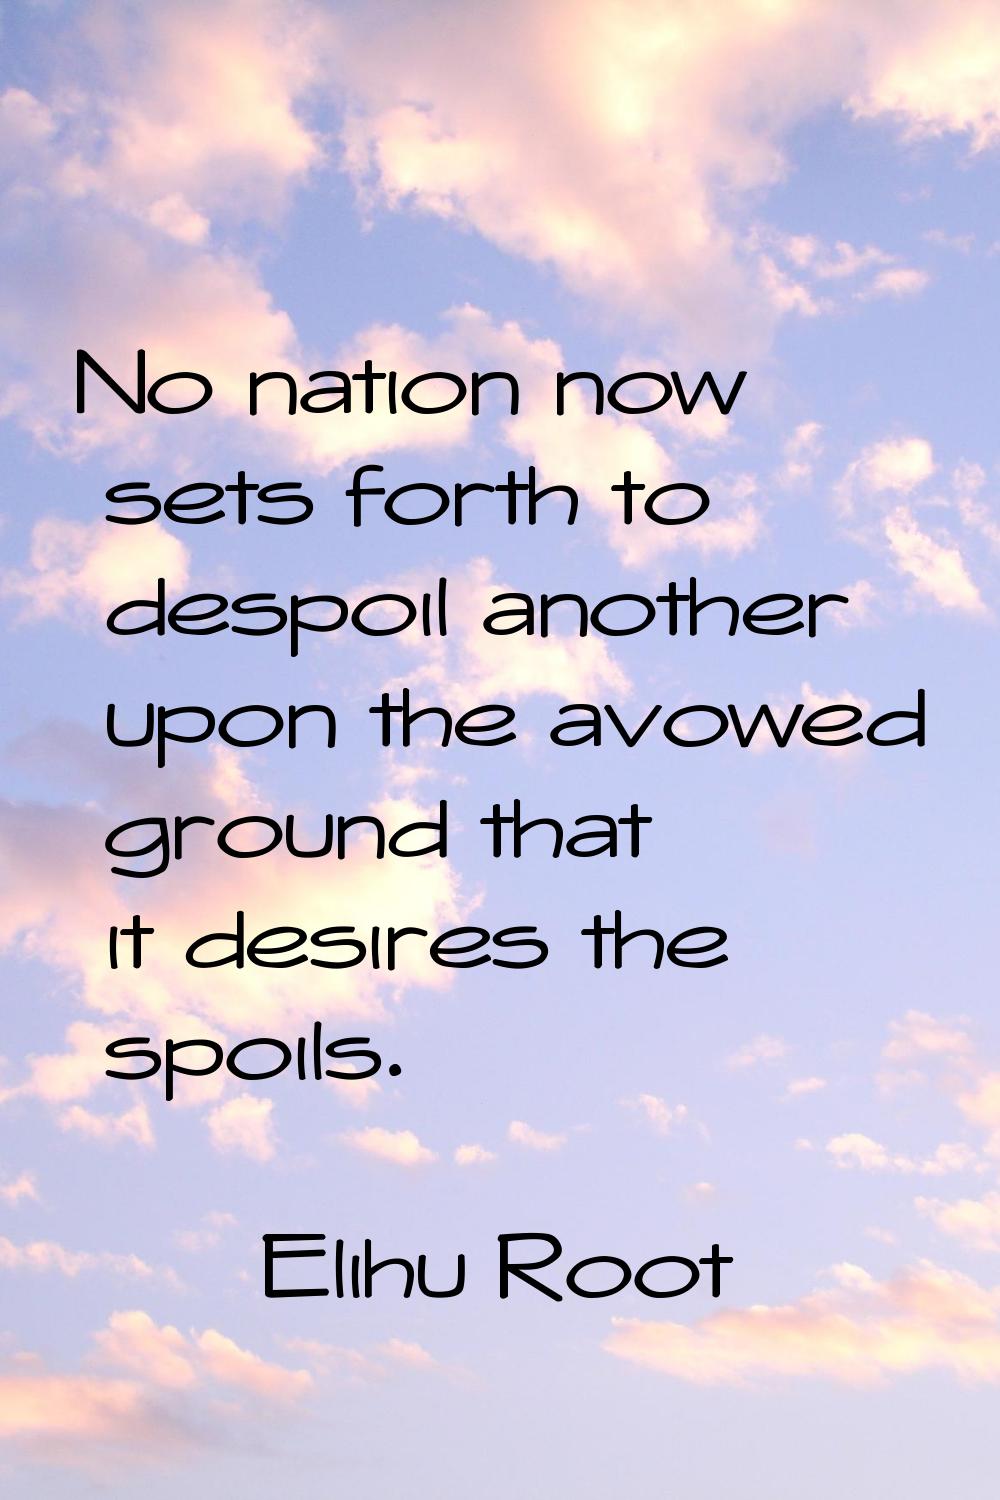 No nation now sets forth to despoil another upon the avowed ground that it desires the spoils.